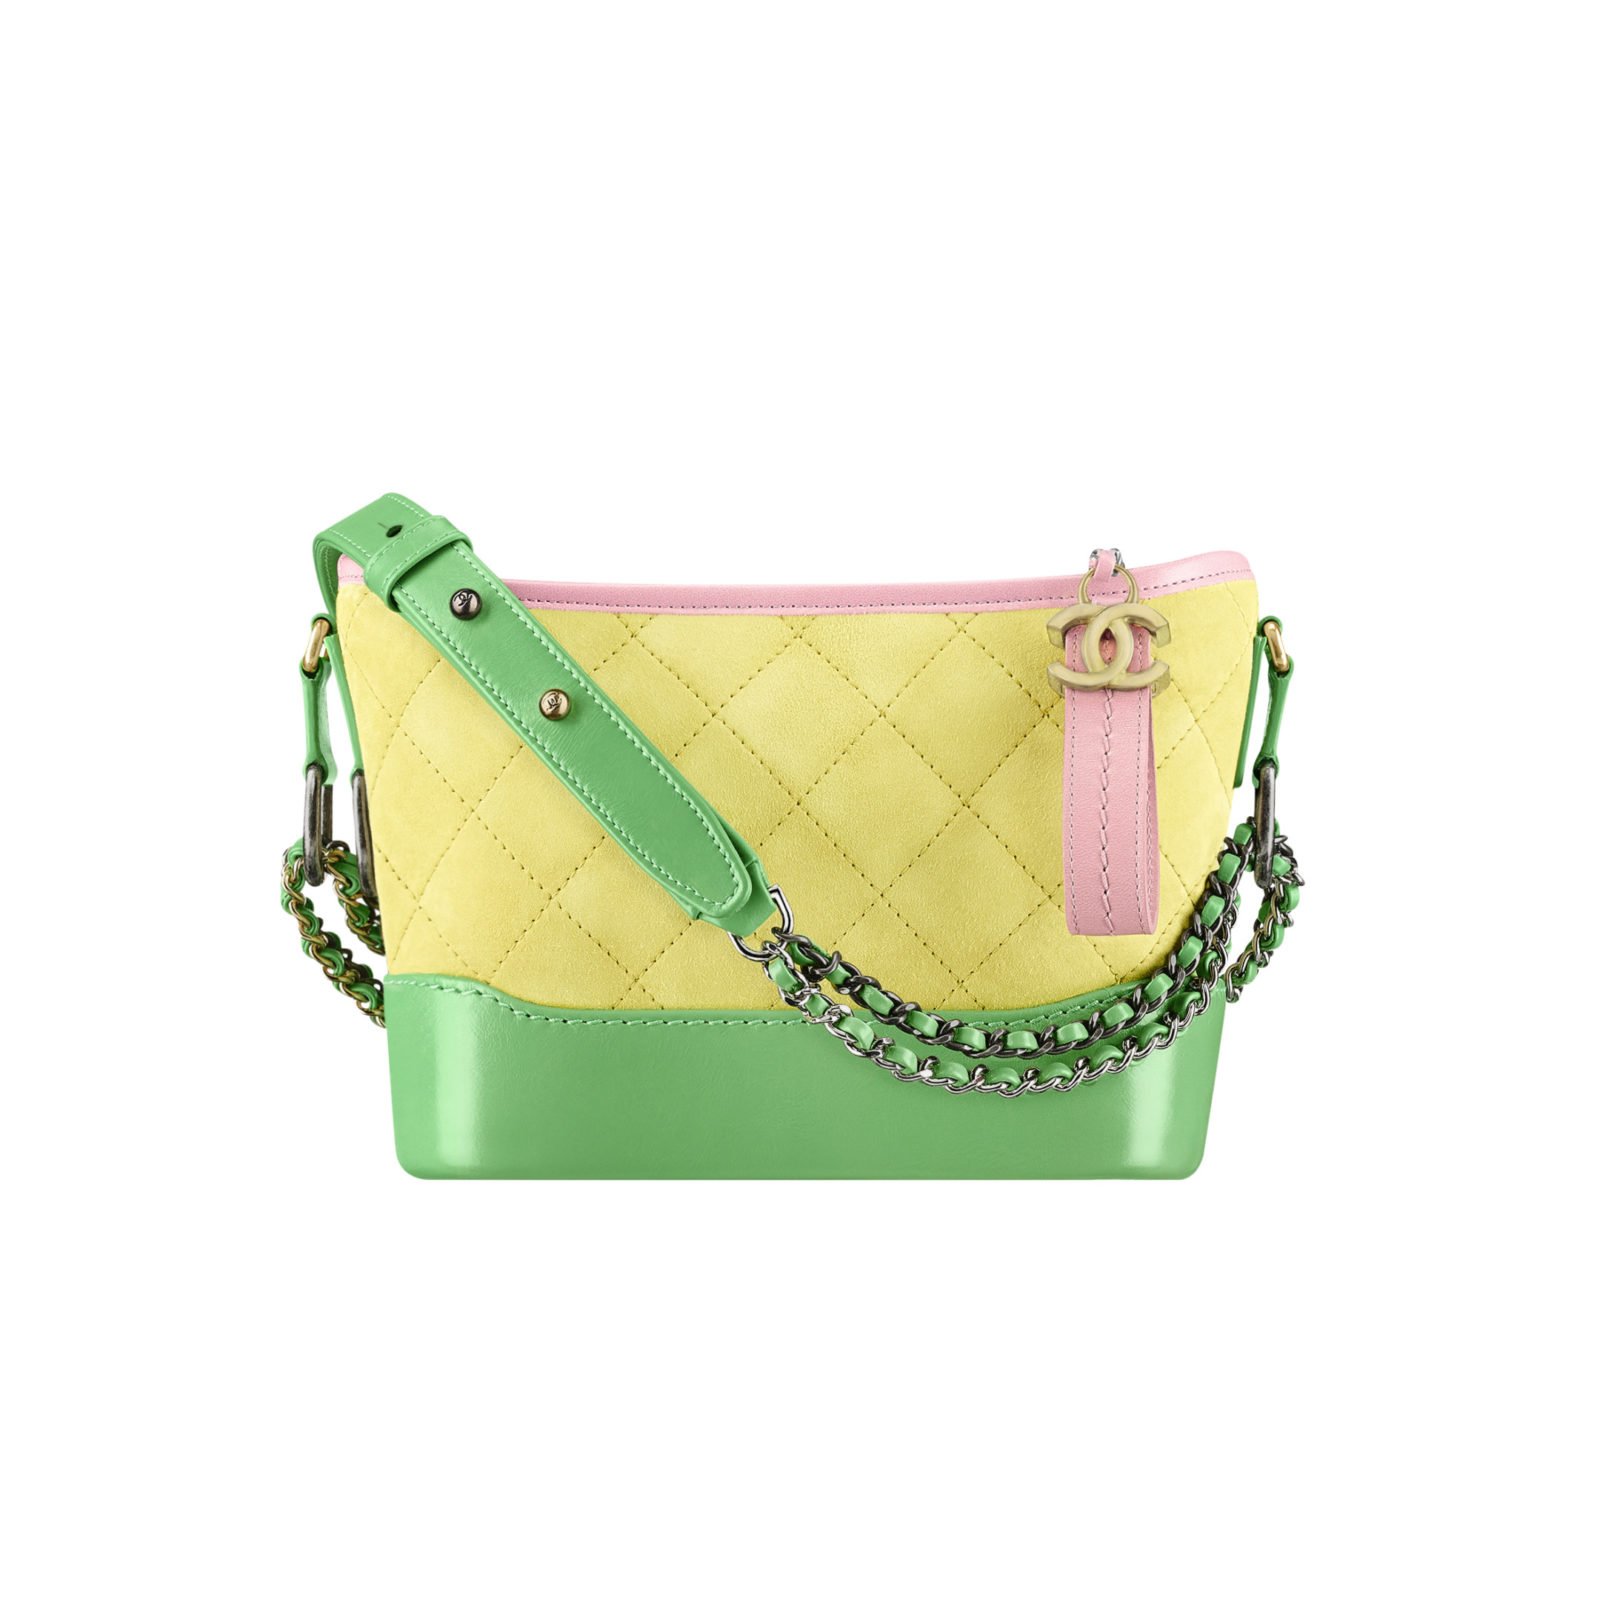 05_A91810-Y82199-K0374-Yellow-green-and-pink-suede-and-leather-CHANELs-GABRIELLE-hobo-bag-copie_HD-1600x0-c-default